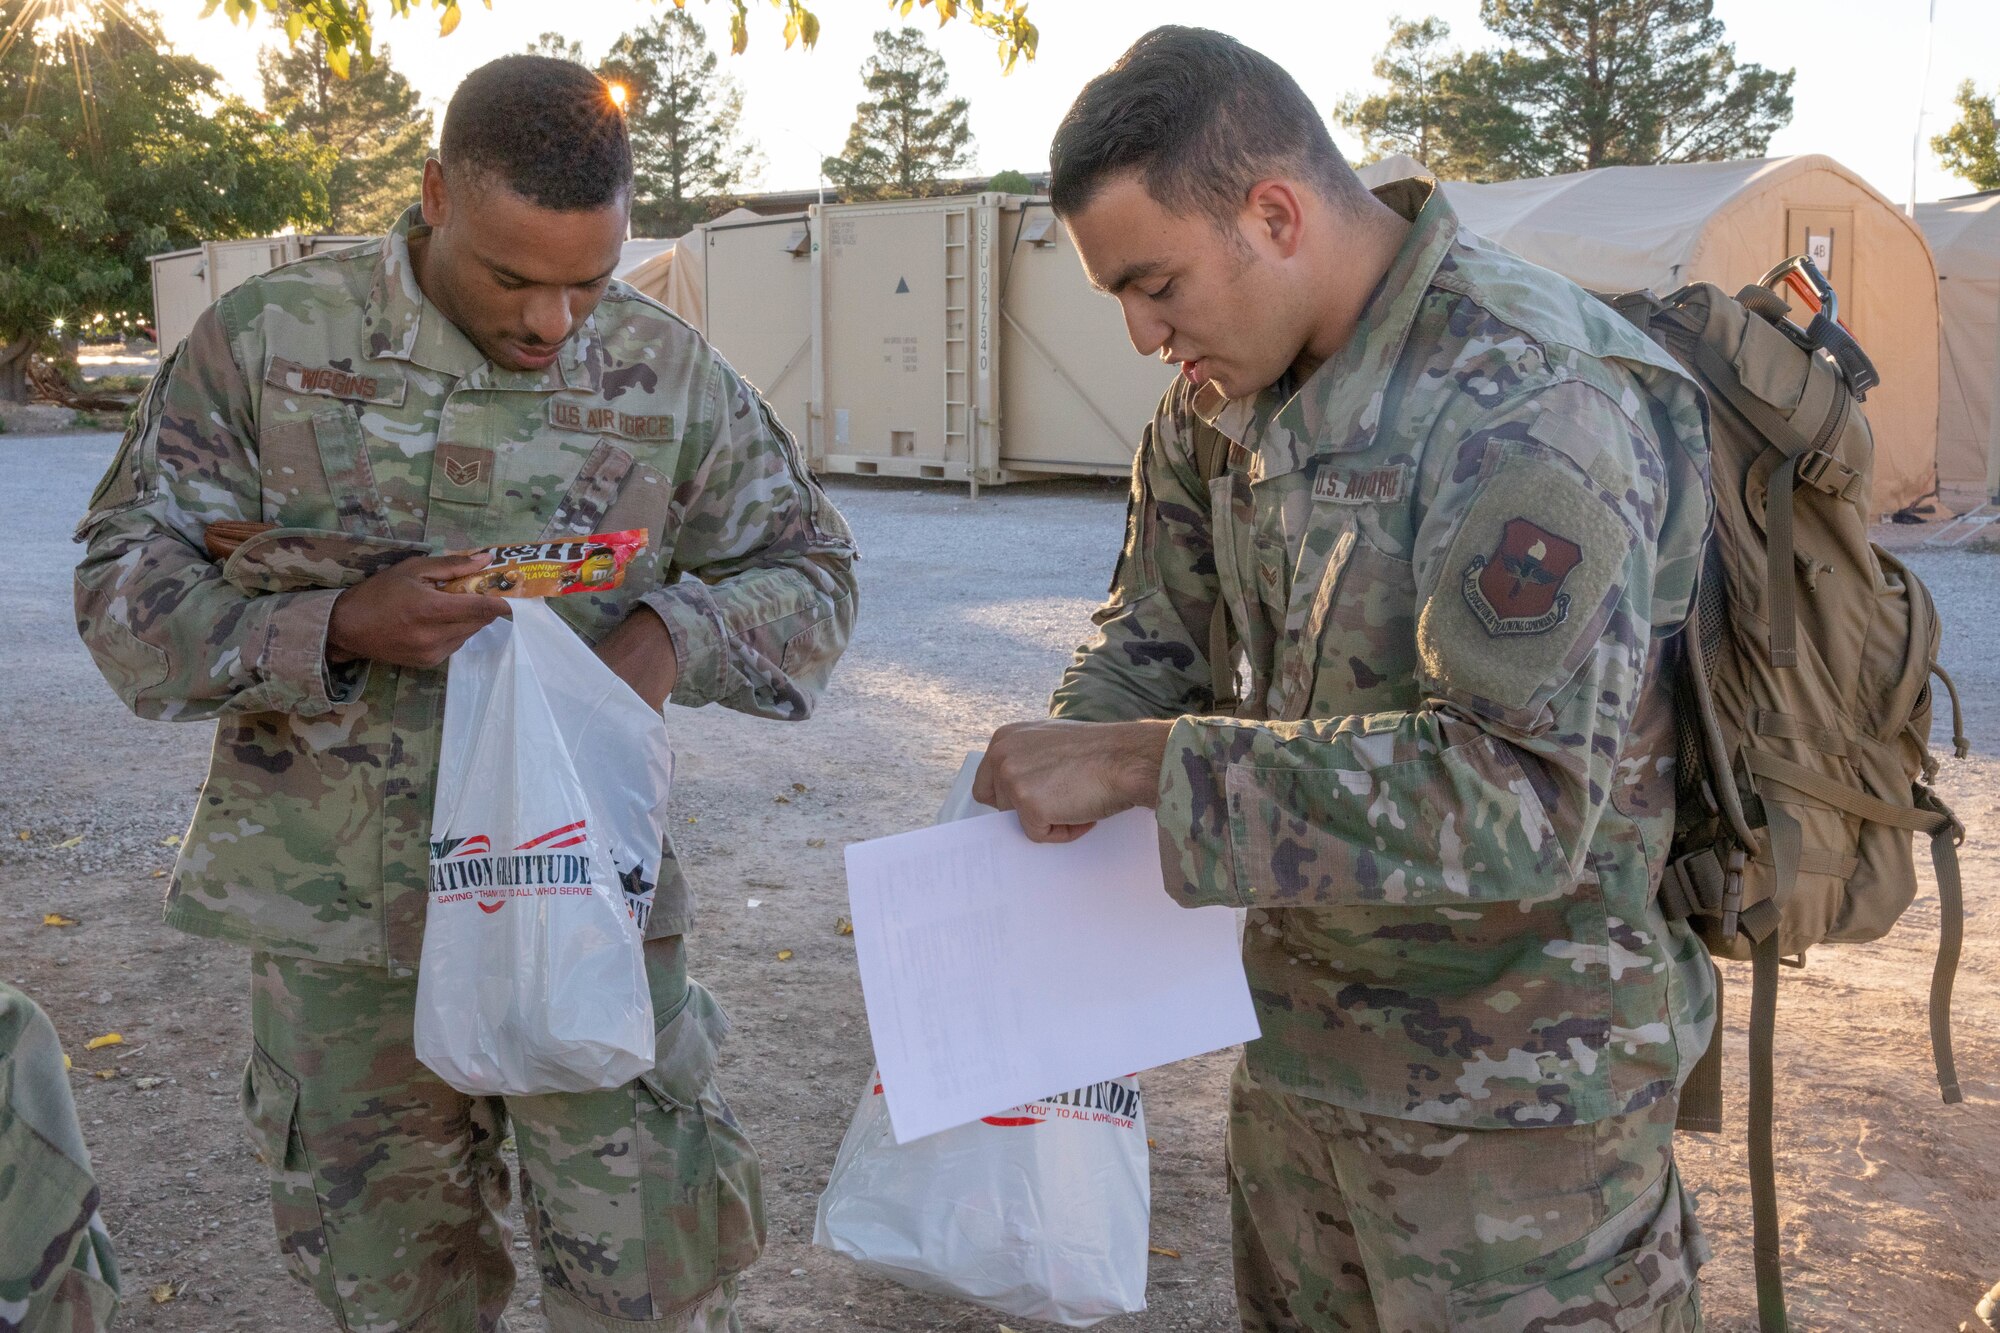 U.S. Air Force Staff Sgt. Lonzo Wiggins and Senior Airman Steven Borin, both assigned to Task Force Holloman, receive care packages from Operation Gratitude, as a thanks for their hard work on Holloman Air Force Base, New Mexico, Oct. 19, 2021. The Department of Defense, through U.S. Northern Command, and in support of the Department of Homeland Security, is providing transportation, temporary housing, medical screening, and general support for at least 50,000 Afghan evacuees at suitable facilities, in permanent or temporary structures, as quickly as possible. This initiative provides Afghan personnel essential support at secure locations outside Afghanistan. (U.S. Army Photo By Pfc. Anthony Ford)